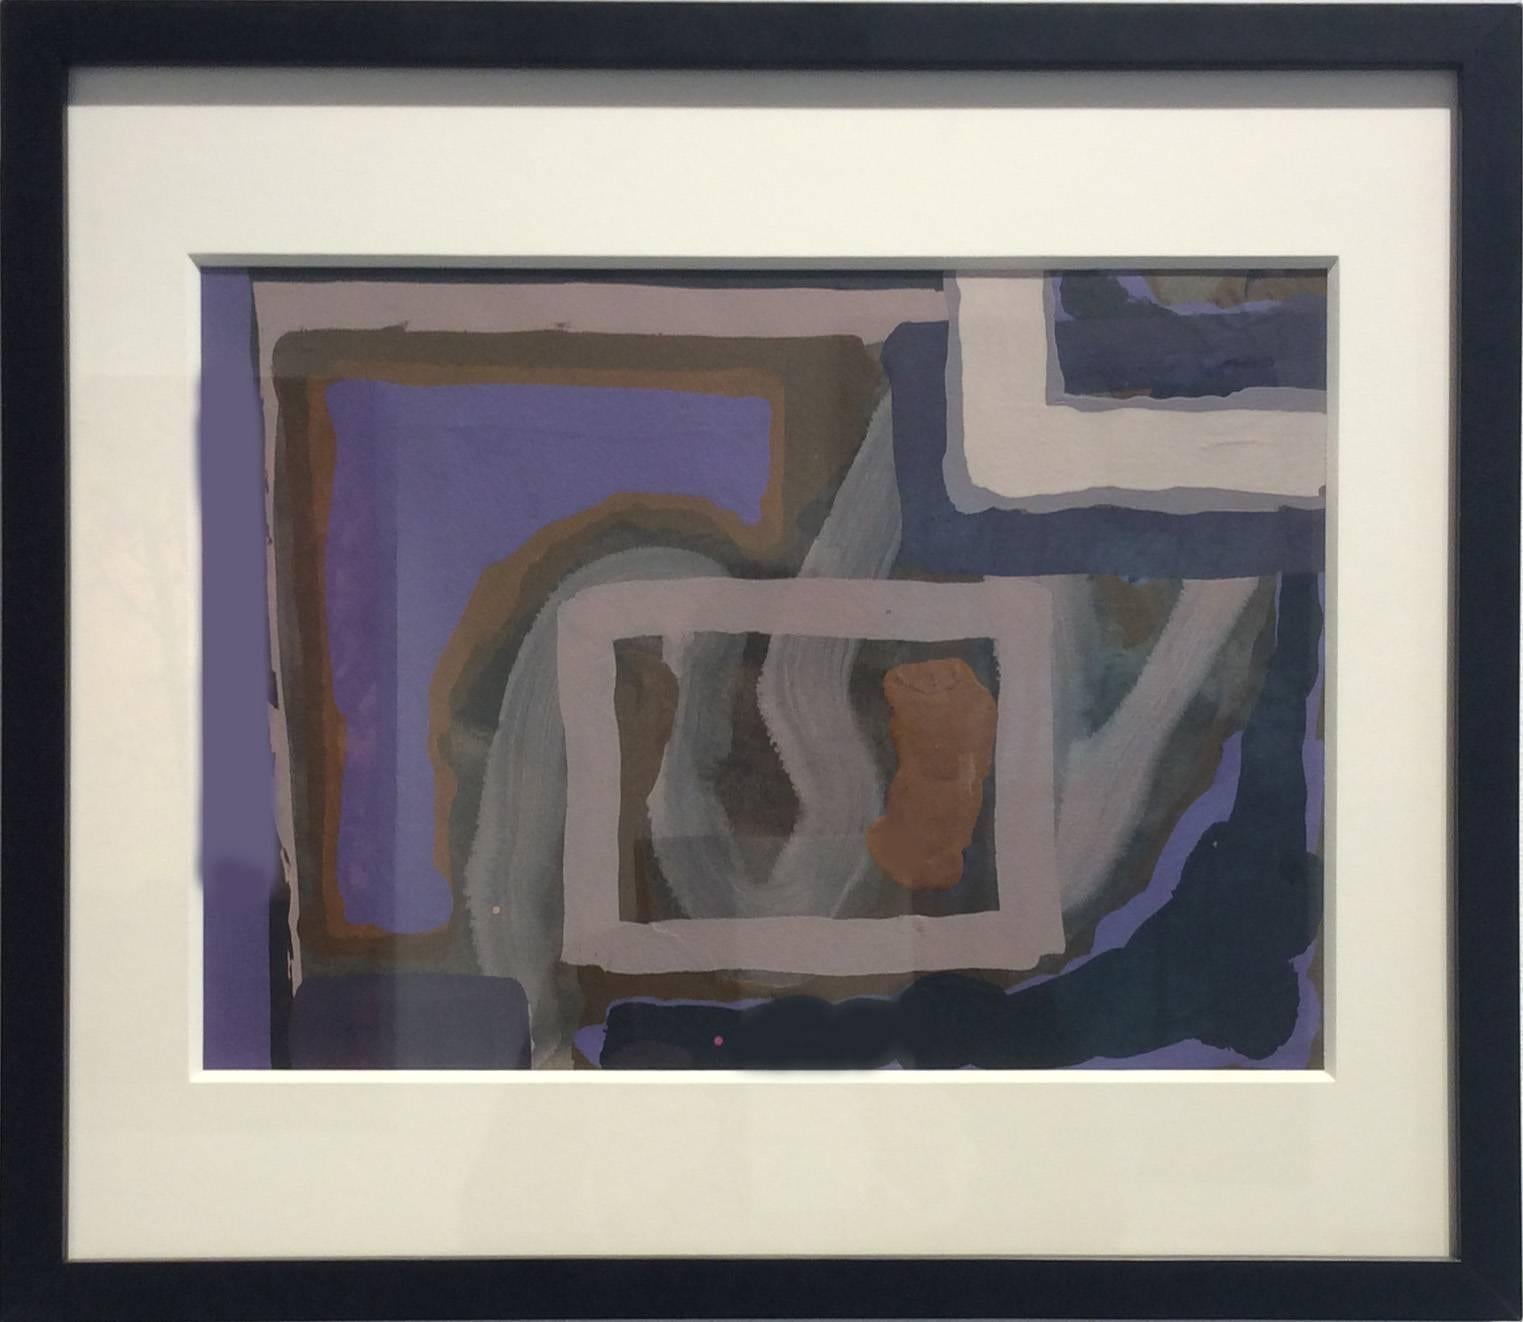 No. 246 (Abstract Expressionist WOP c. 1960 by NYC Color Field Painter) - Painting by Edward Avedisian